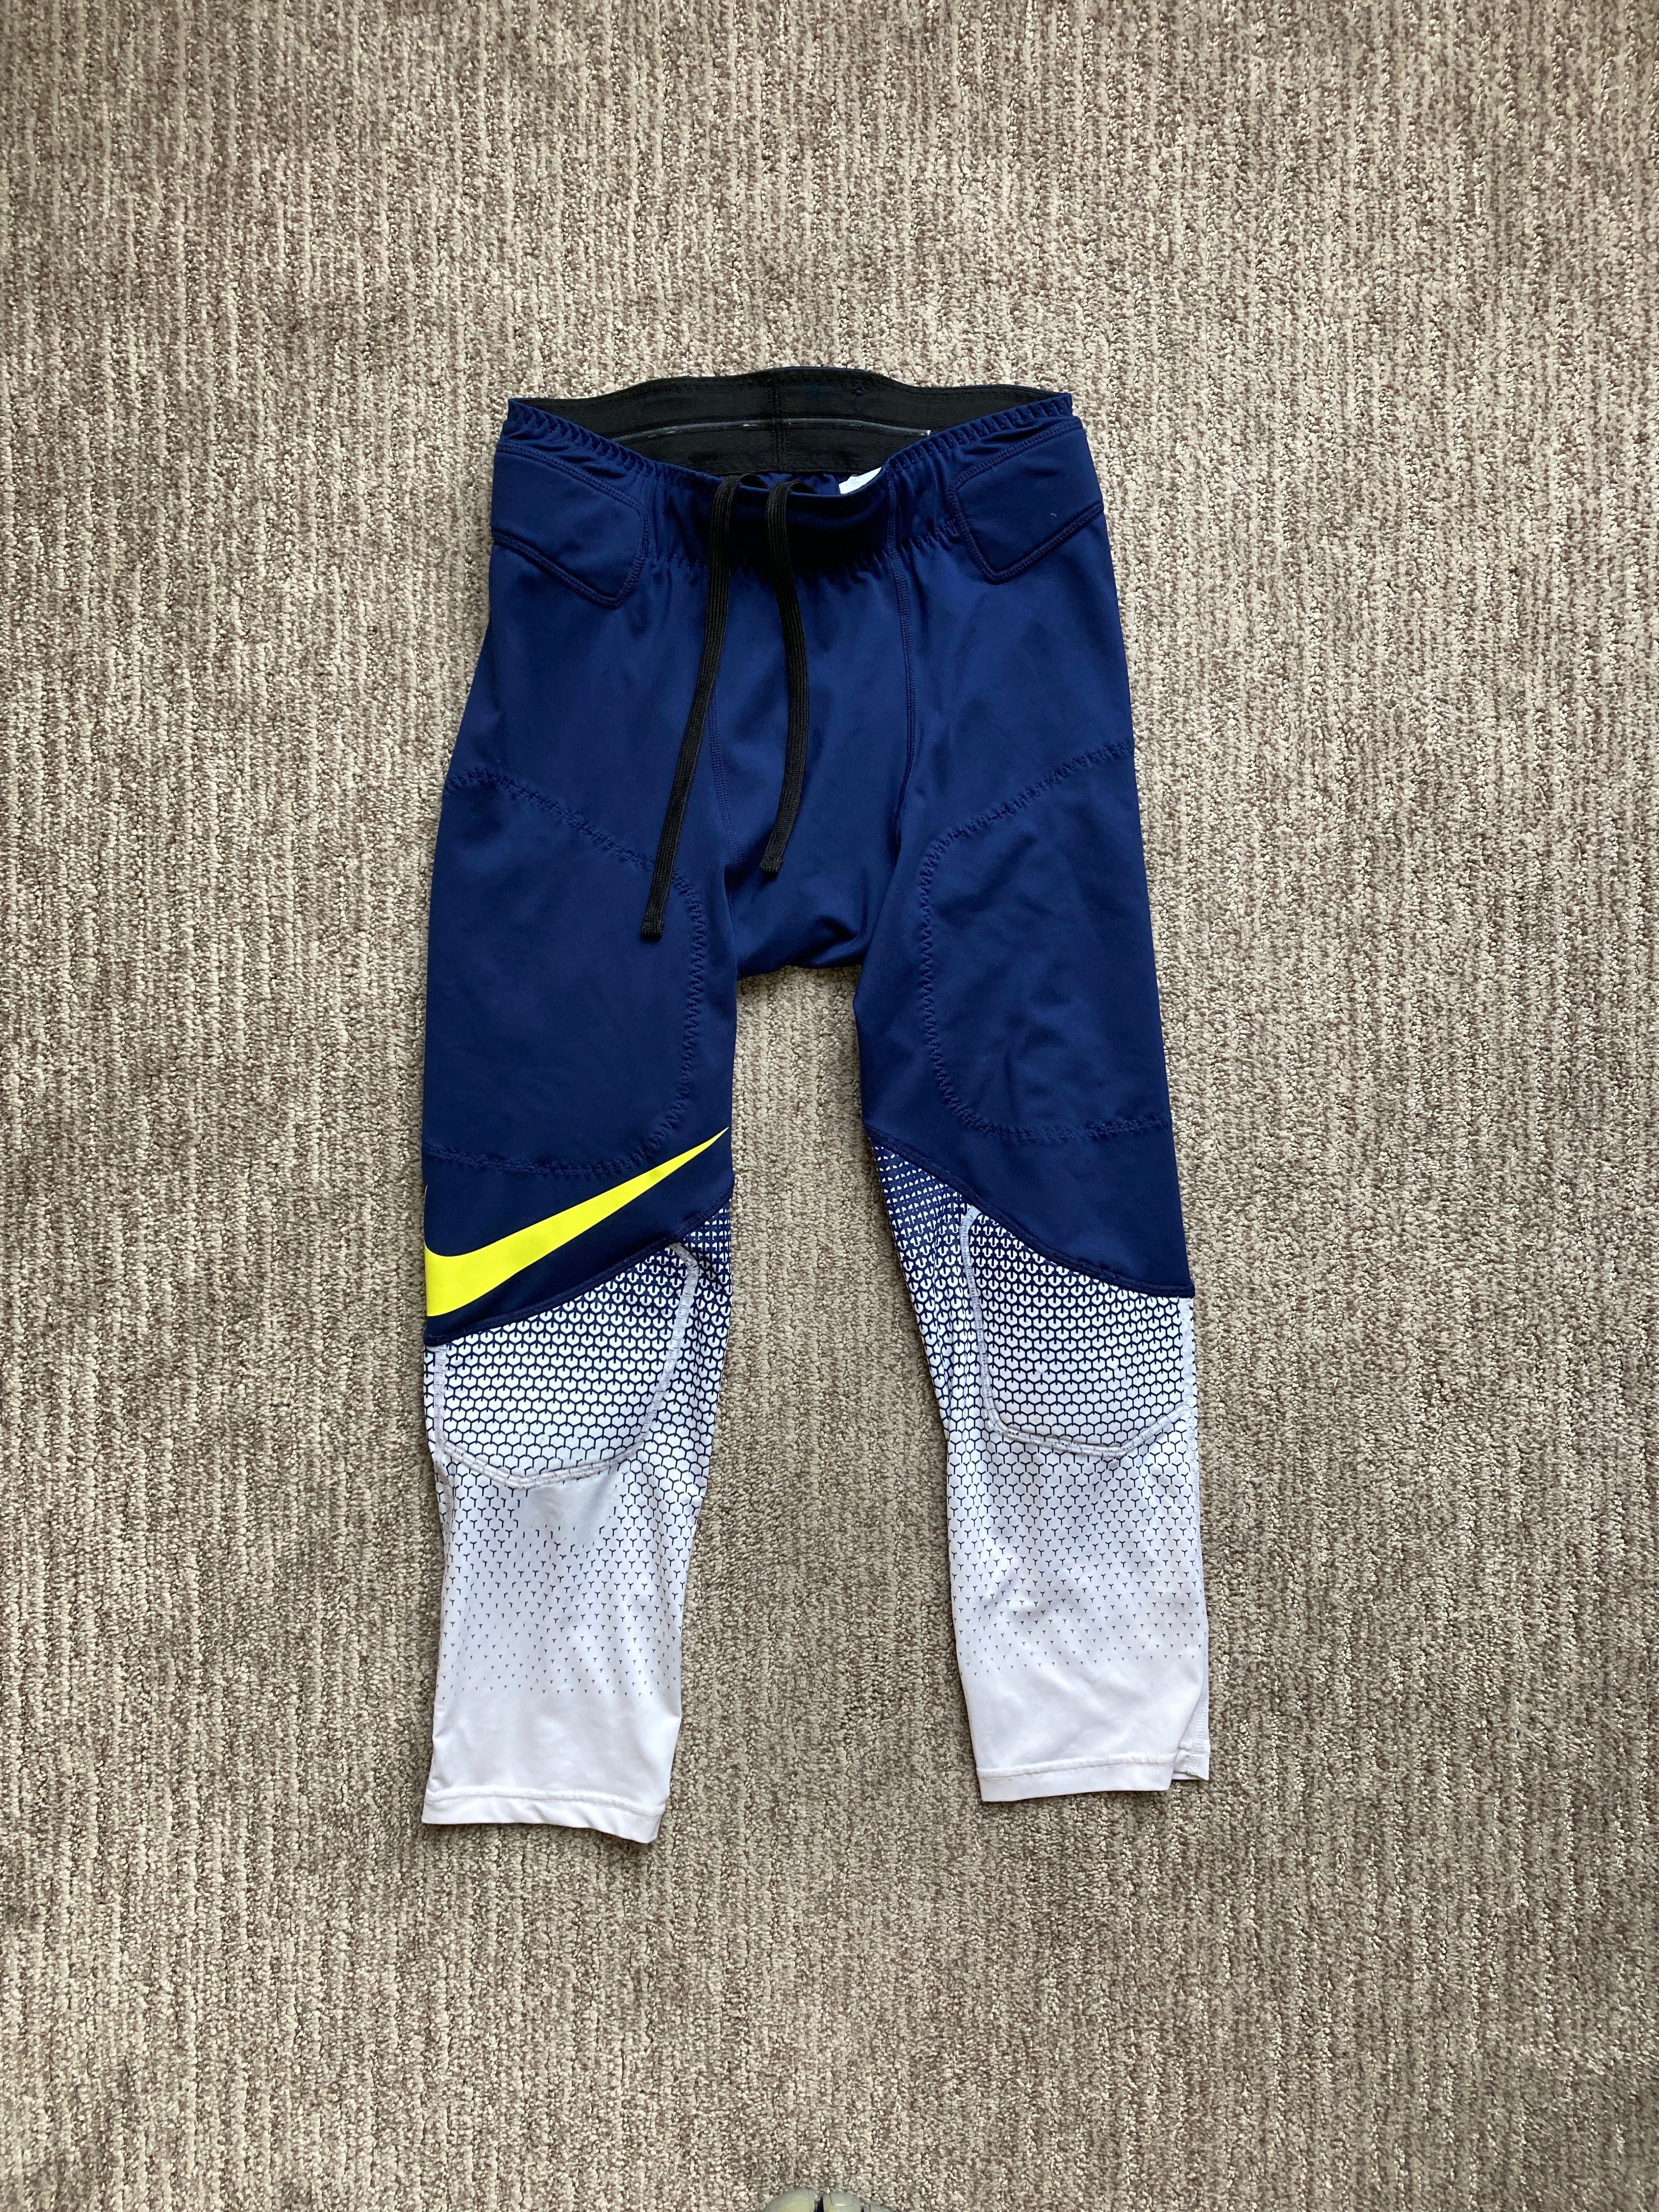 Mens Nike Pro Hyperstrong NBA Padded 34 Compression Pants White XLT 2XLT  3XLT  ASA College Florida